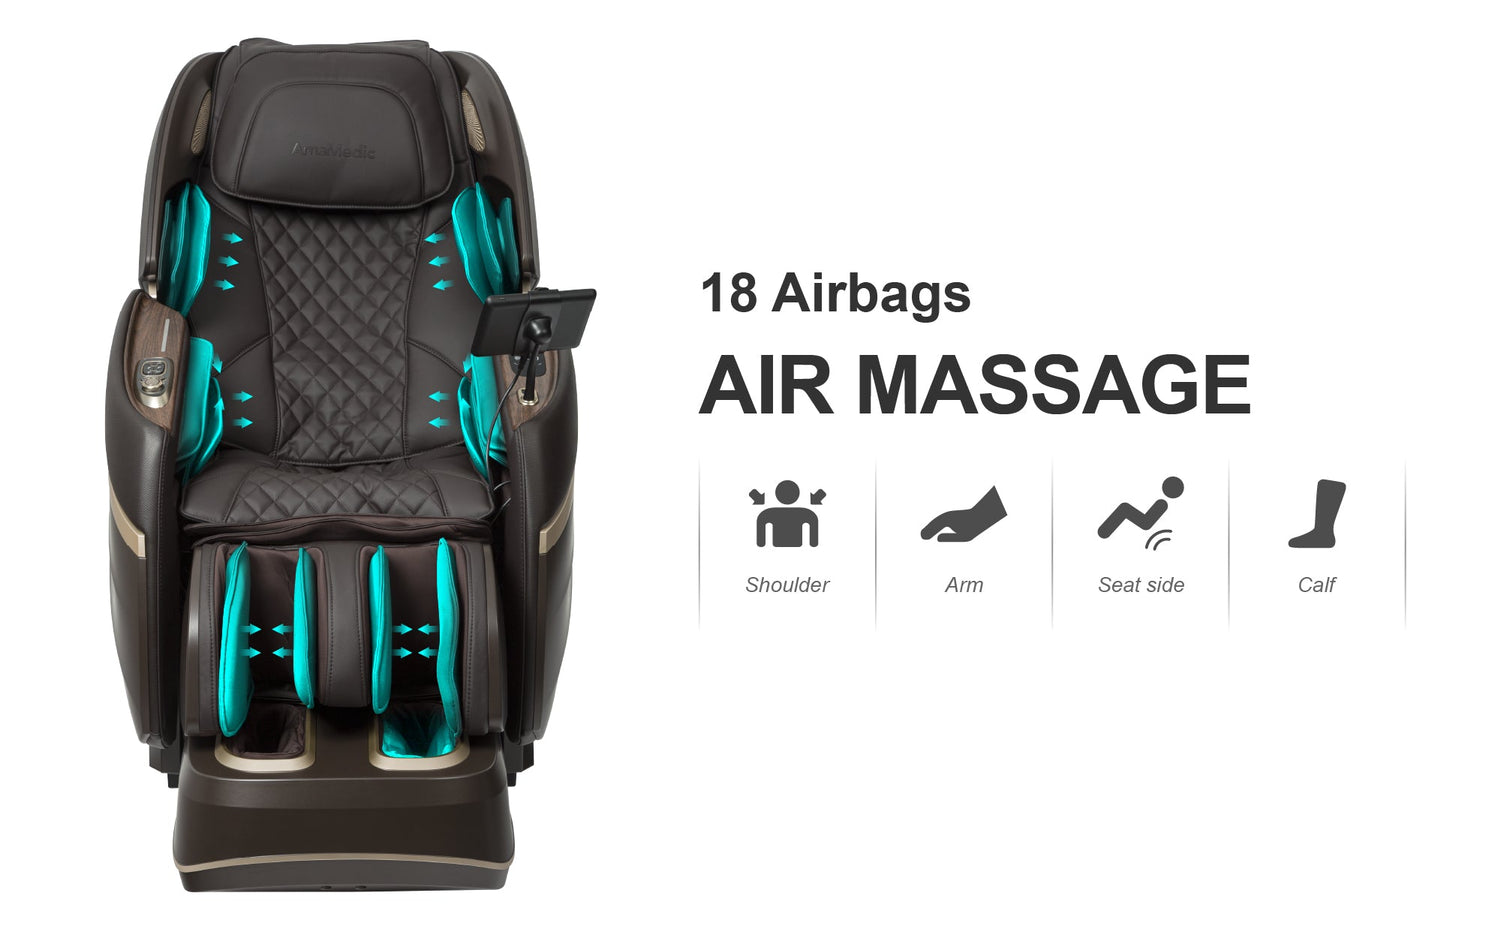 The Amamedic Hilux 4D Massage Chair offers 18 highly advanced airbags that cover more surface area with reliability. 